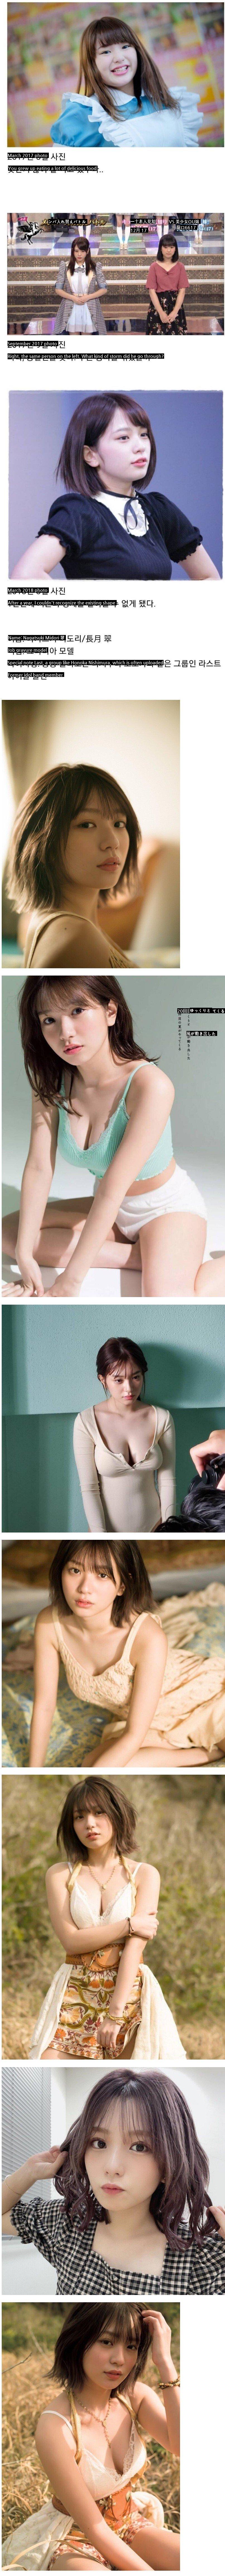 Before and after a diet of sushi soup idols,